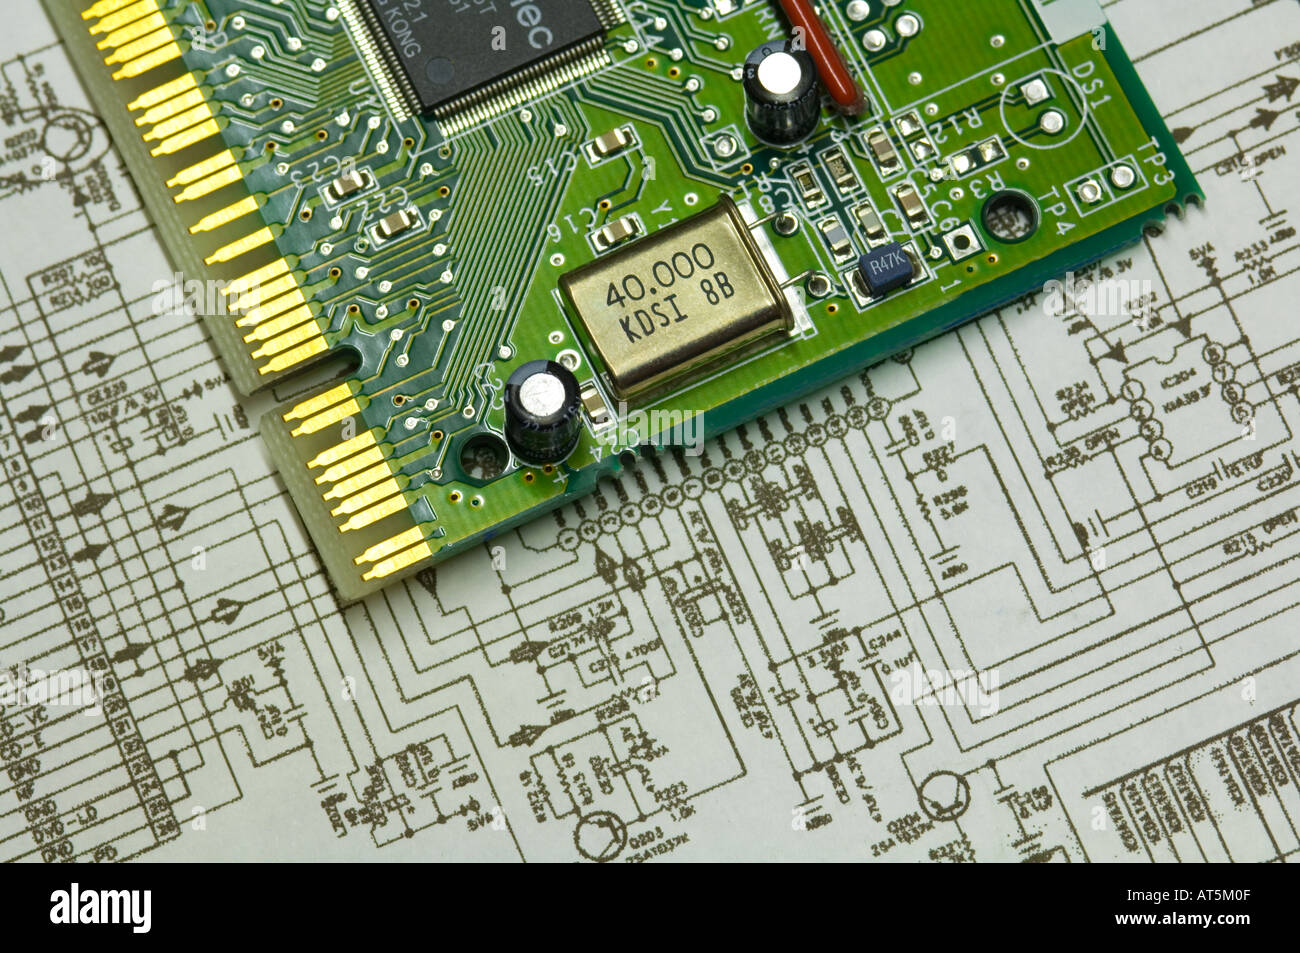 circuit board and schematic drawing of an electronic plan Stock Photo